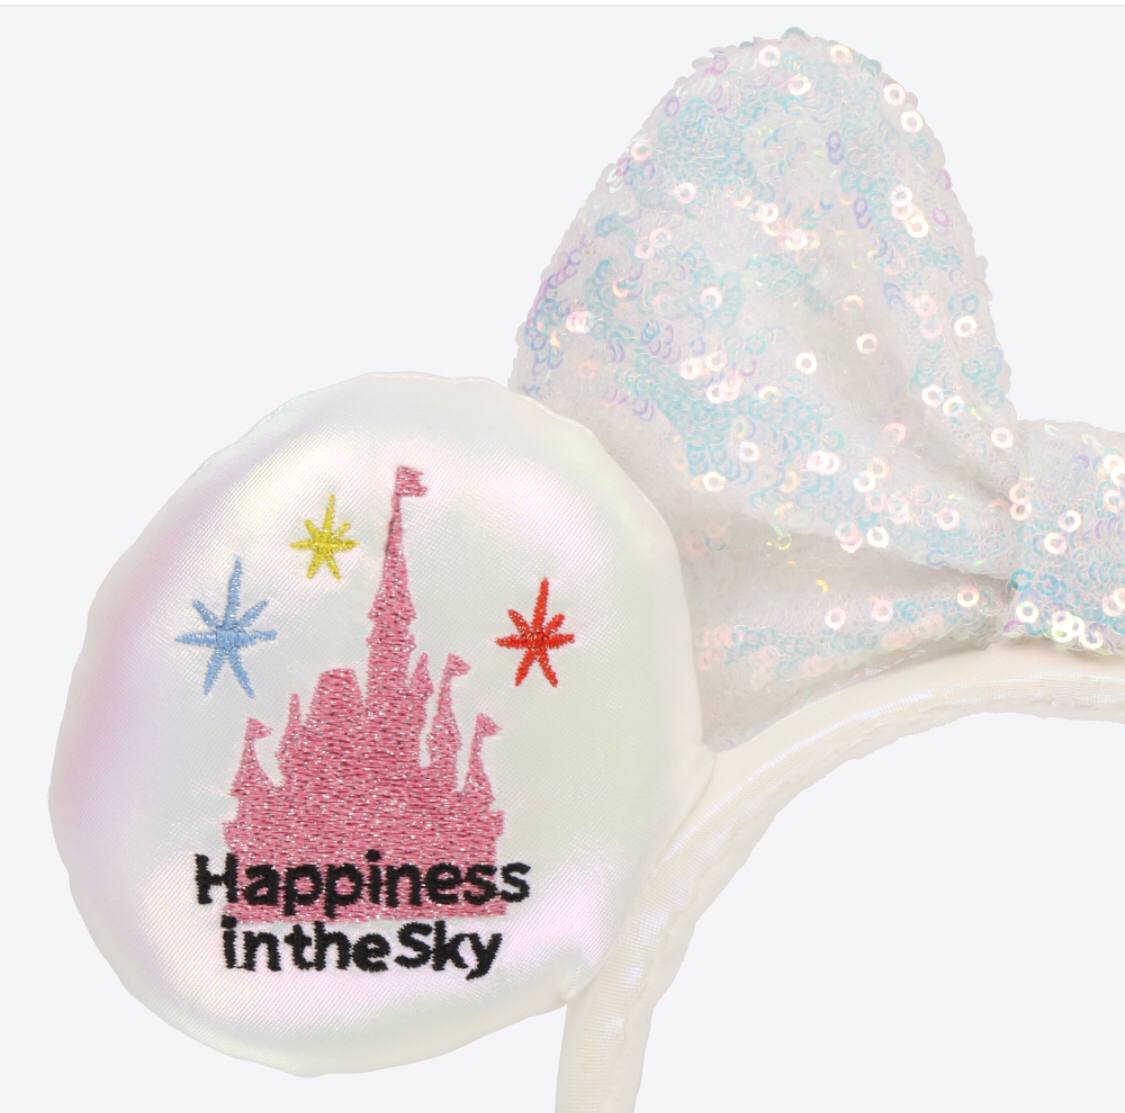 TDR - Happiness in the sky - ears